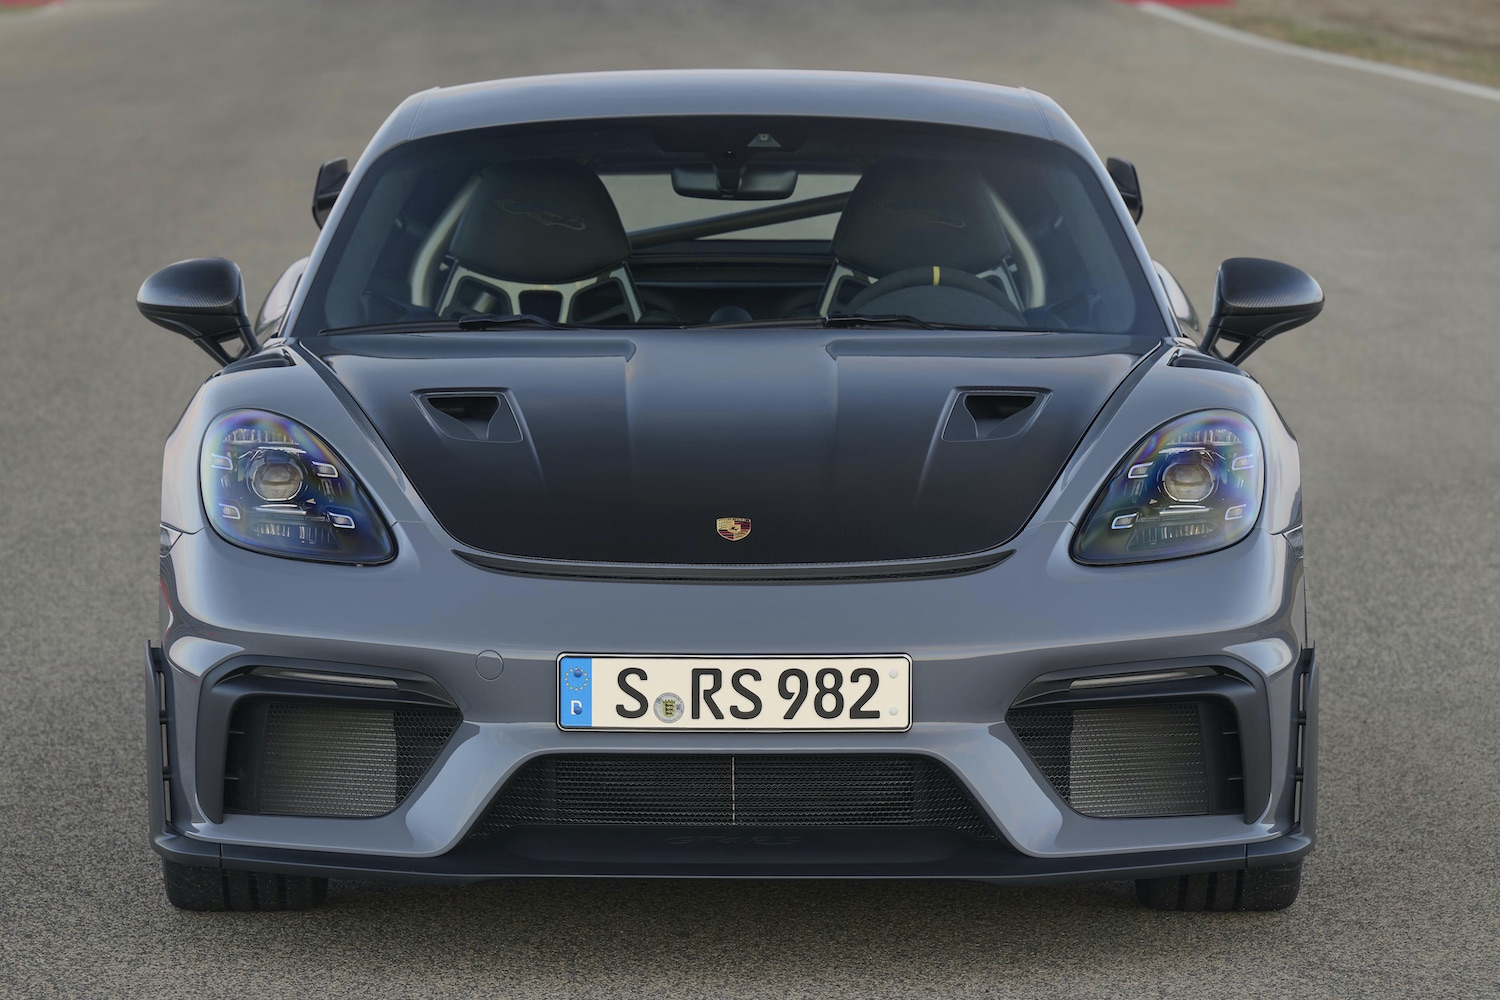 Porsche 718 Cayman GT4 RS front end close up on track.